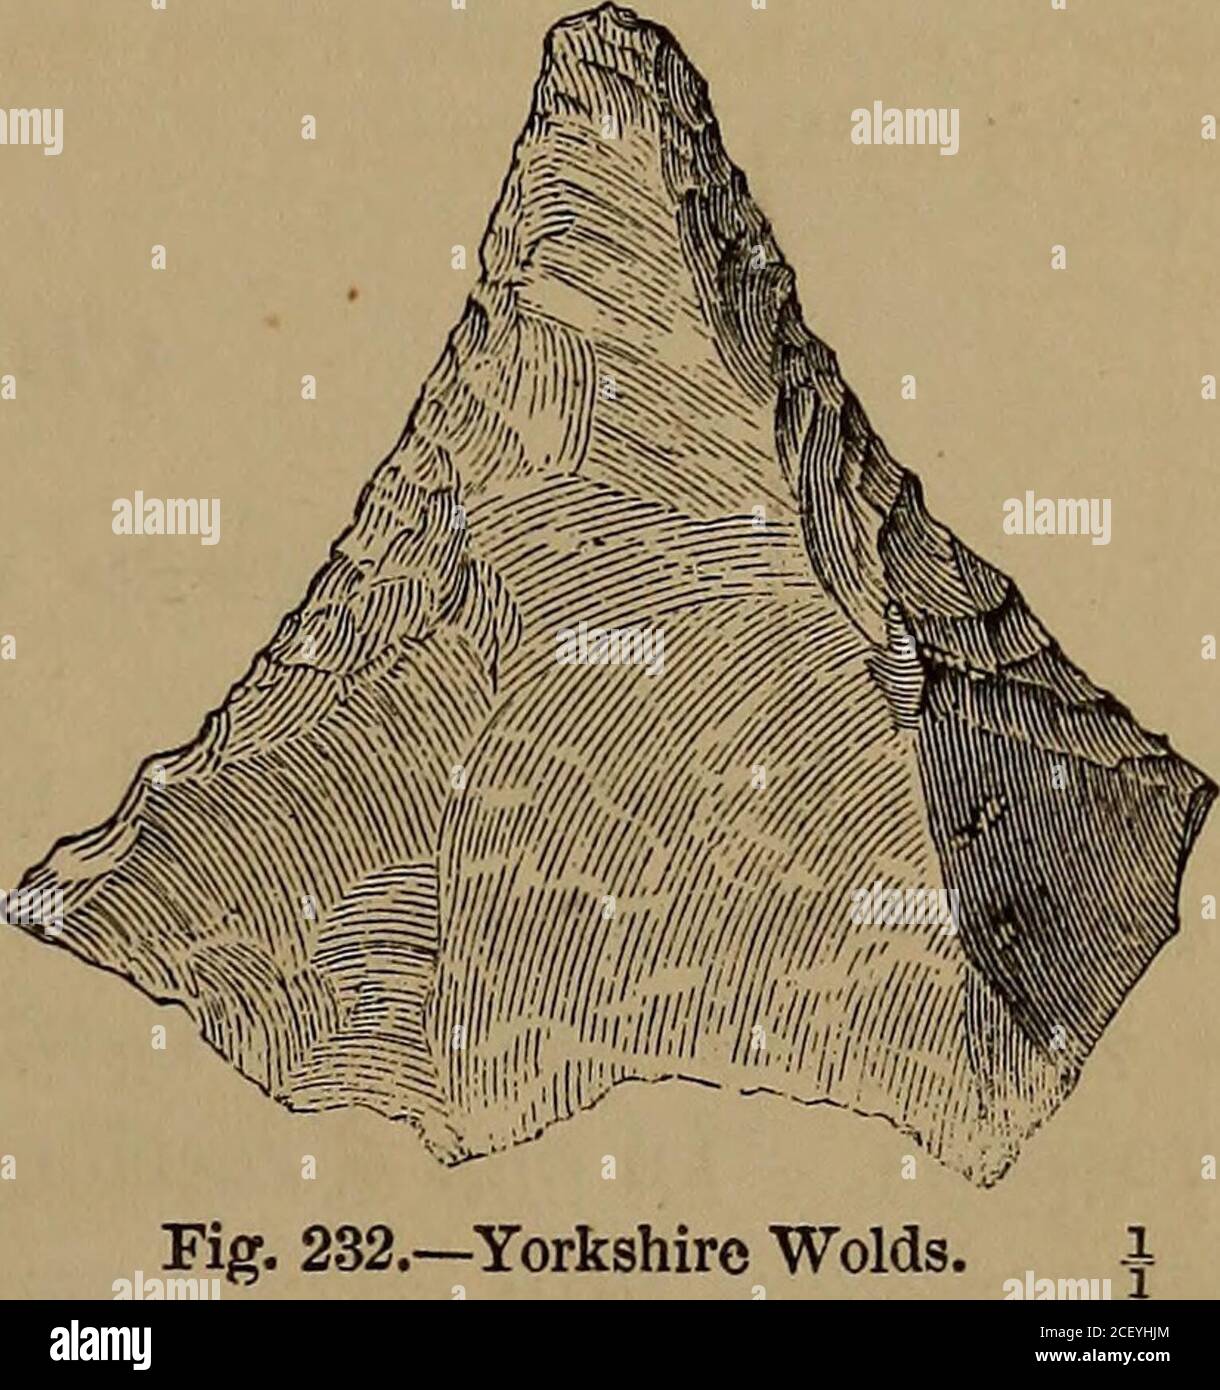 . The ancient stone implements, weapons, and ornaments, of Great Britain. Eg. 231.—Yorkshire Wolds. £. Fig. 232.—Yorkshire Wolds ig. 232, also from the Yorkshire Wolds, was presented to me byMr. Charles Monkman, of Malton. Though more acutely pointed thanFig. 231, it seems to have been intended for much the same purpose,and it has been formed ^in a similar manner. The secondary working isprincipally on the convex face of the flake, but owing to an irregularityin the surface of the flat face, a portion of it has been removed bysecondary chipping along one edge, so as to bring it as nearly aspos Stock Photo